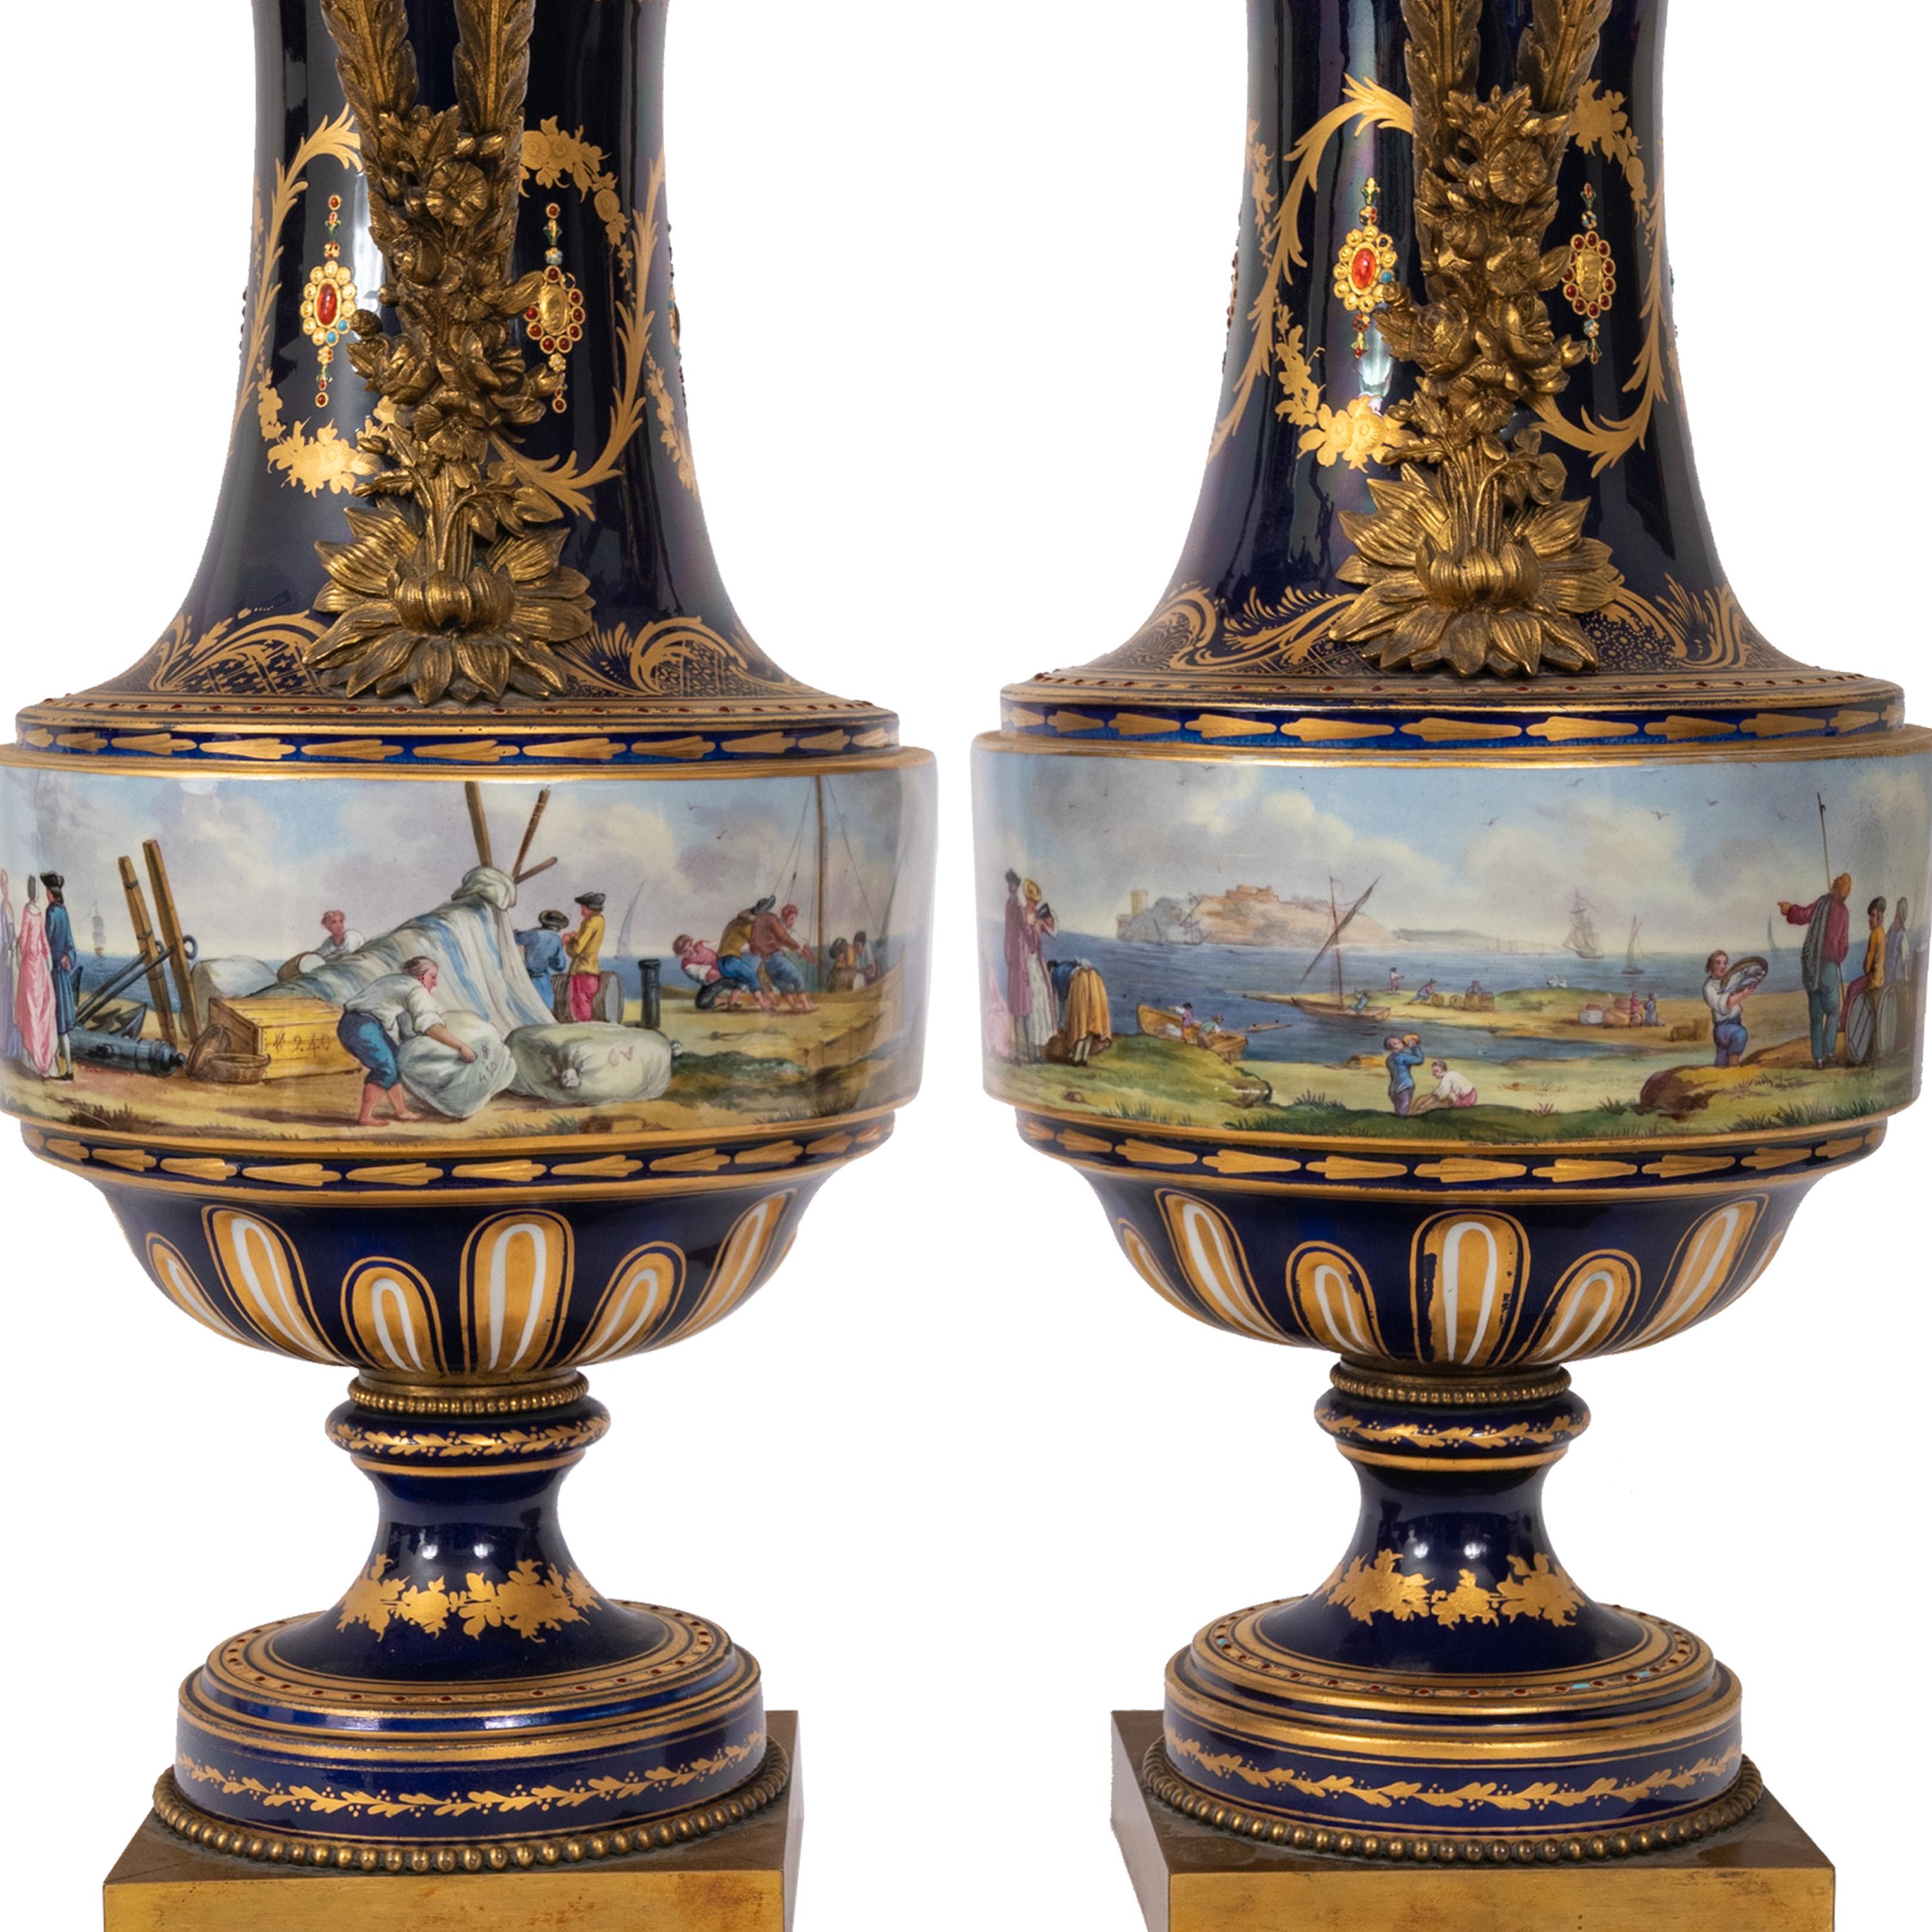 Bronze Pair 19th Century Monumental Antique Sevres French Porcelain Ormolu Urns 1860 For Sale